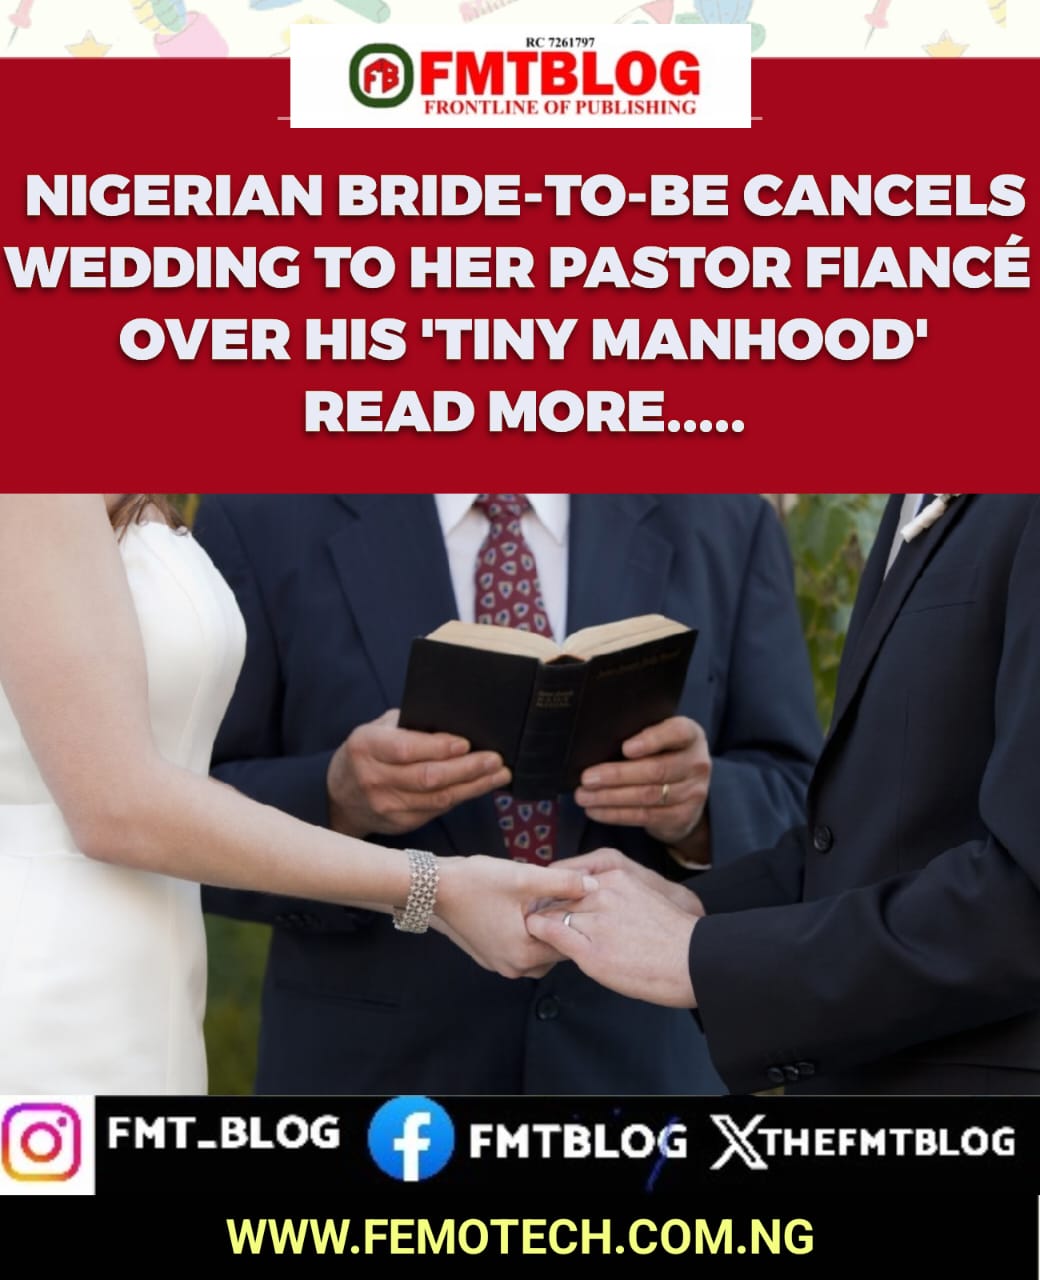 Nigerian Bride-To-Be Cancels Wedding To Her Pastor Fiancé Over His ‘Tiny Manhood’